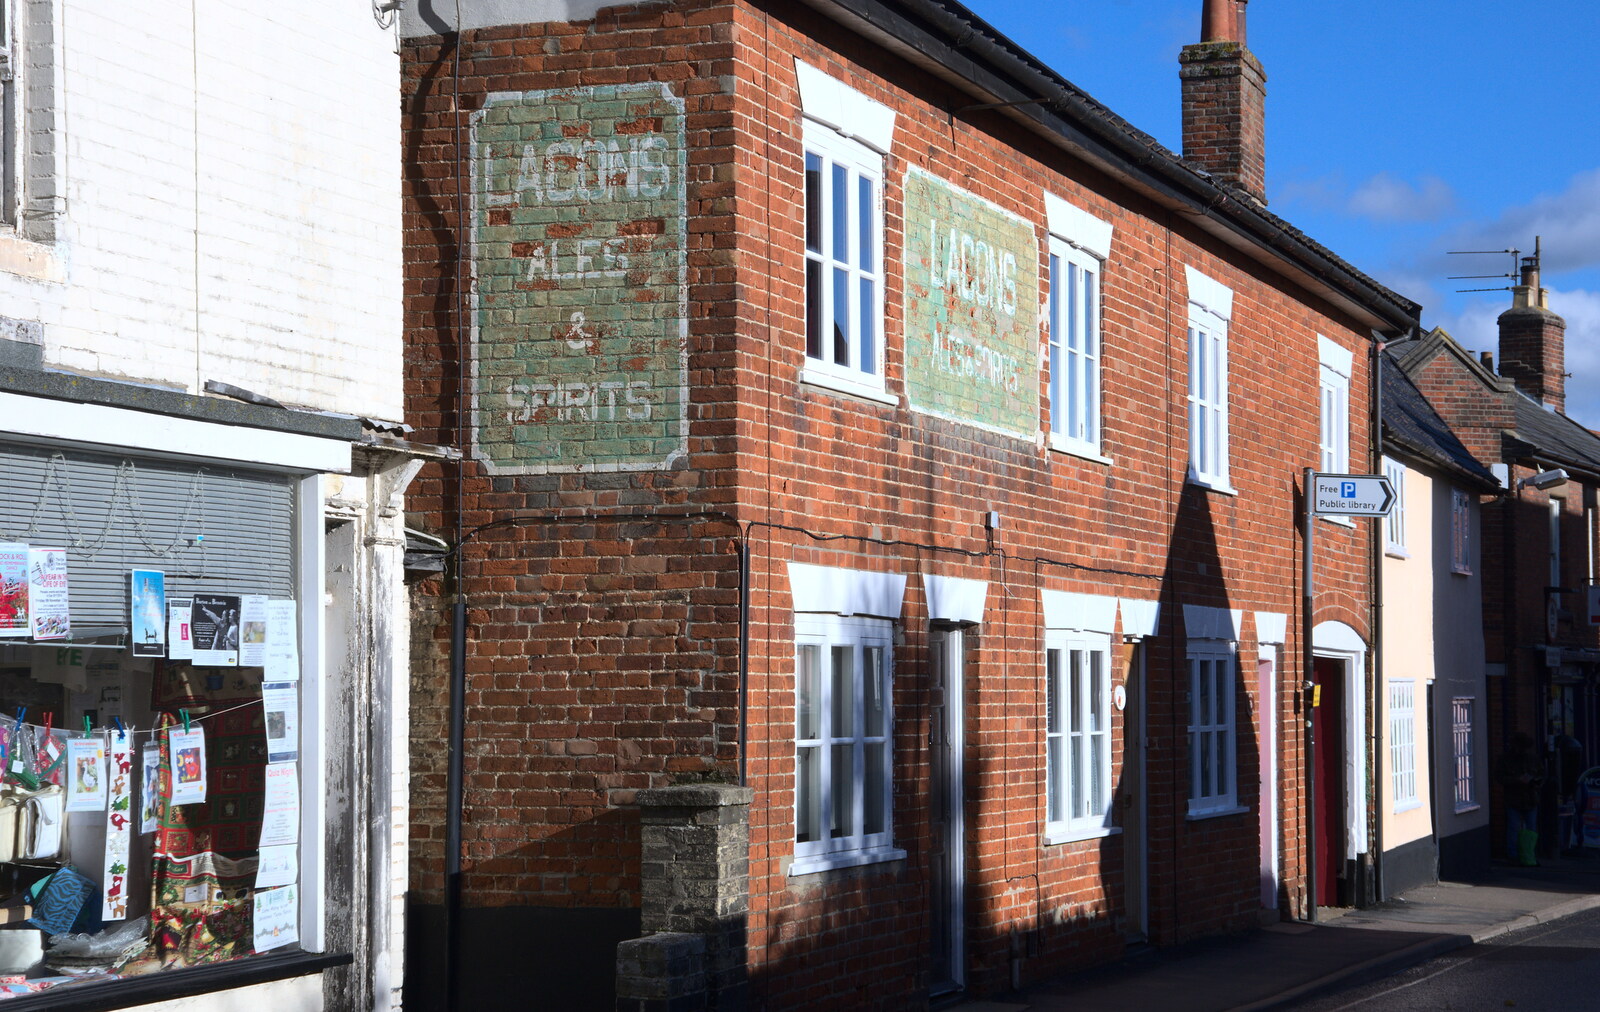 Old Lacons pub signs on a wall from The Remembrance Sunday Parade, Eye, Suffolk - 11th November 2018